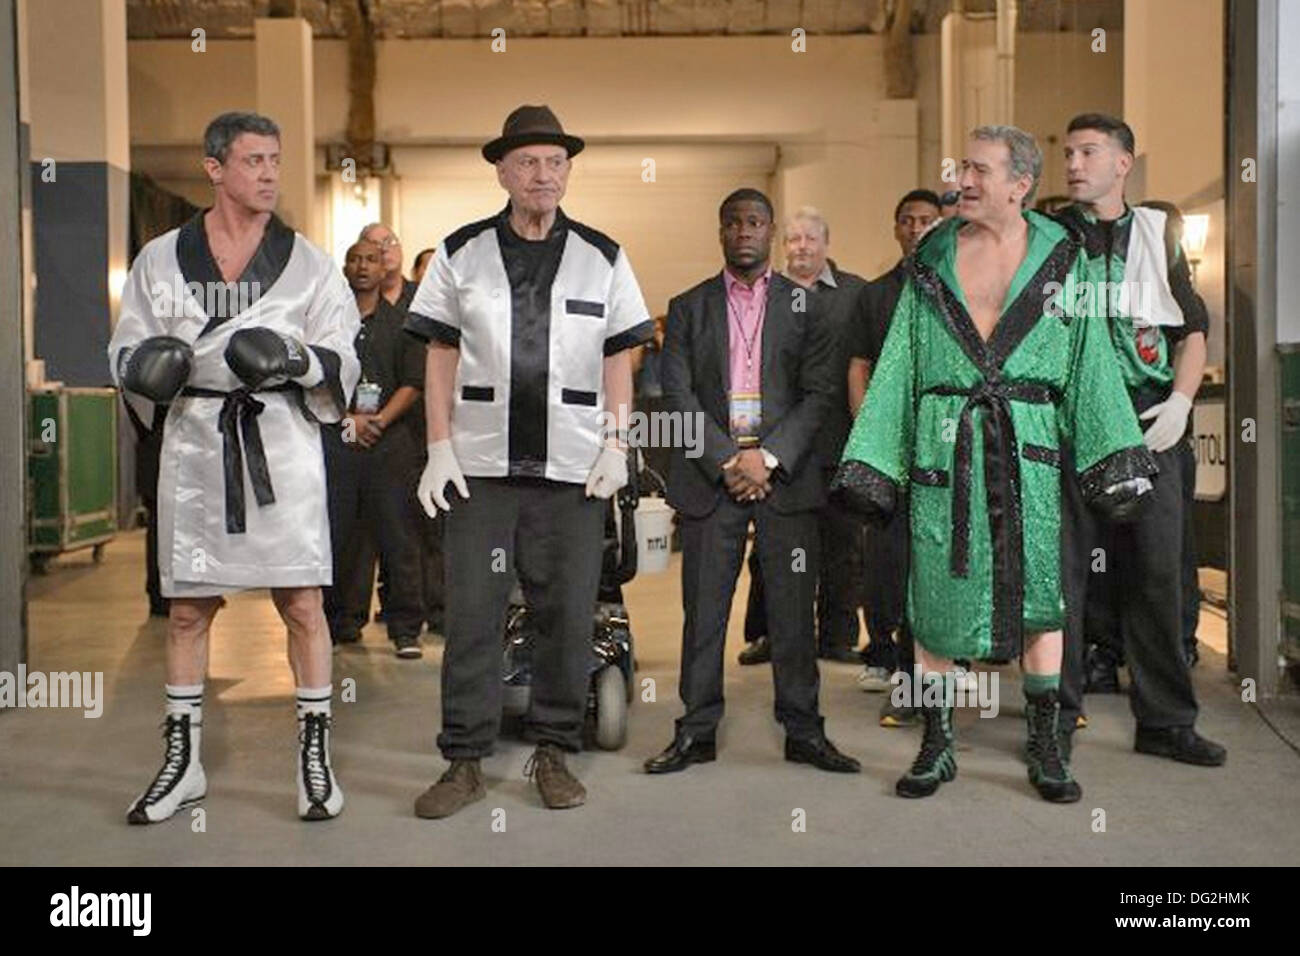 GRUDGE MATCH 2013  Warner Bros film ith Sylvester Stallone at left and Robert De Niro in green Stock Photo